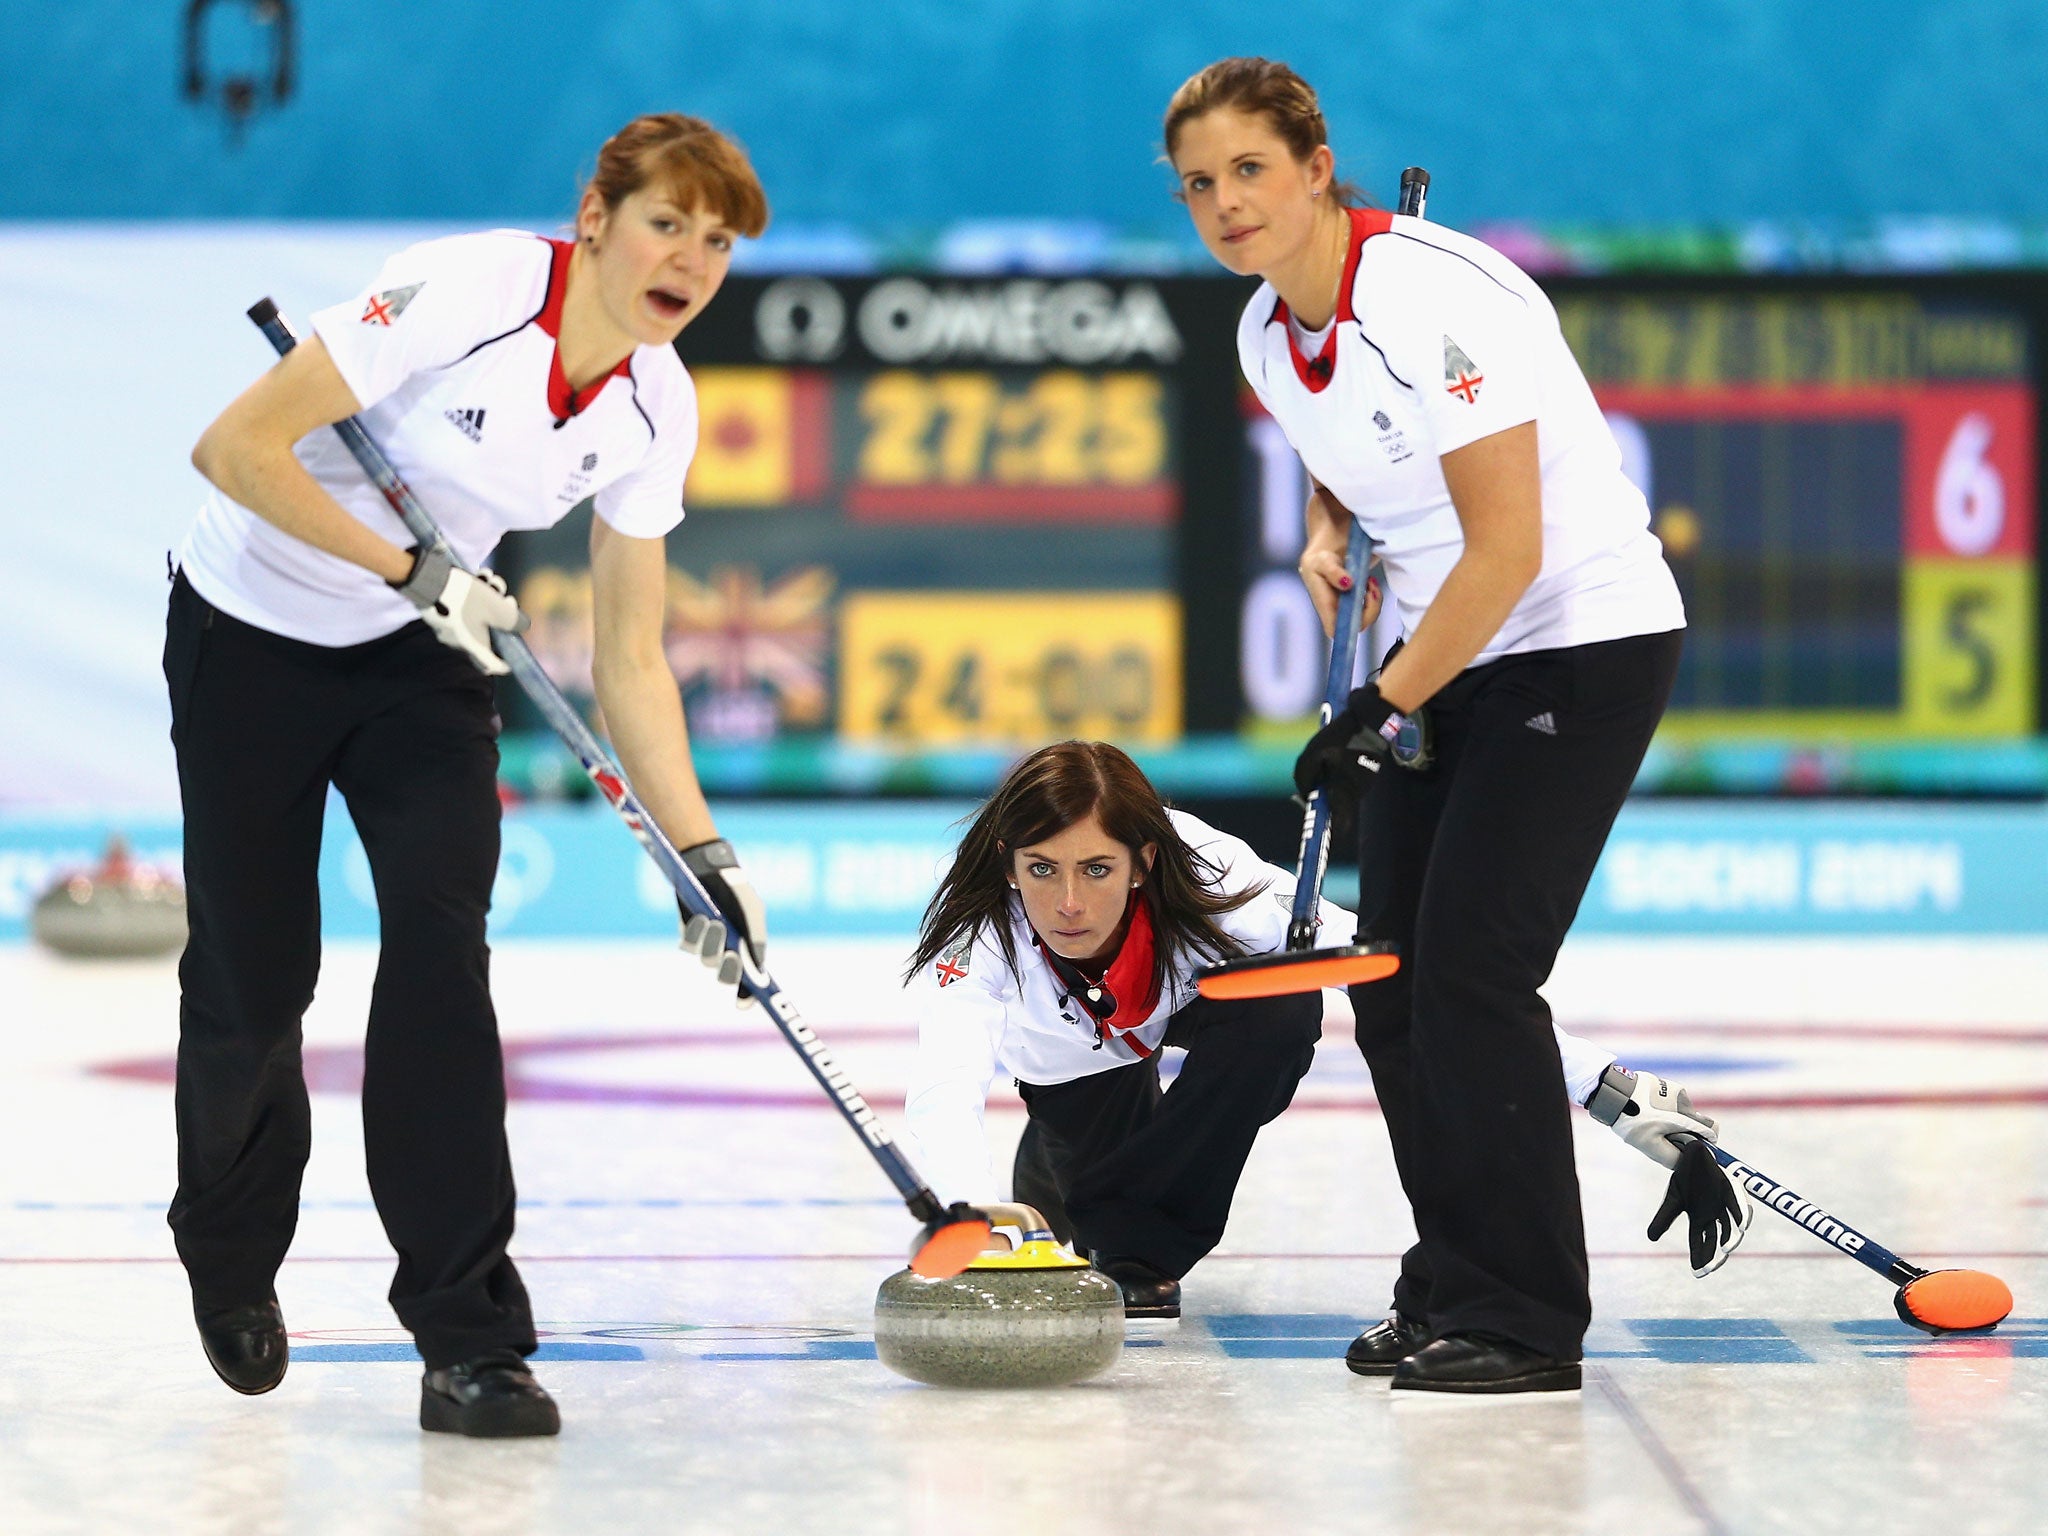 Winter Olympics 2014 Great Britain S Women S Curling Team Suffer Second Defeat Of Campaign